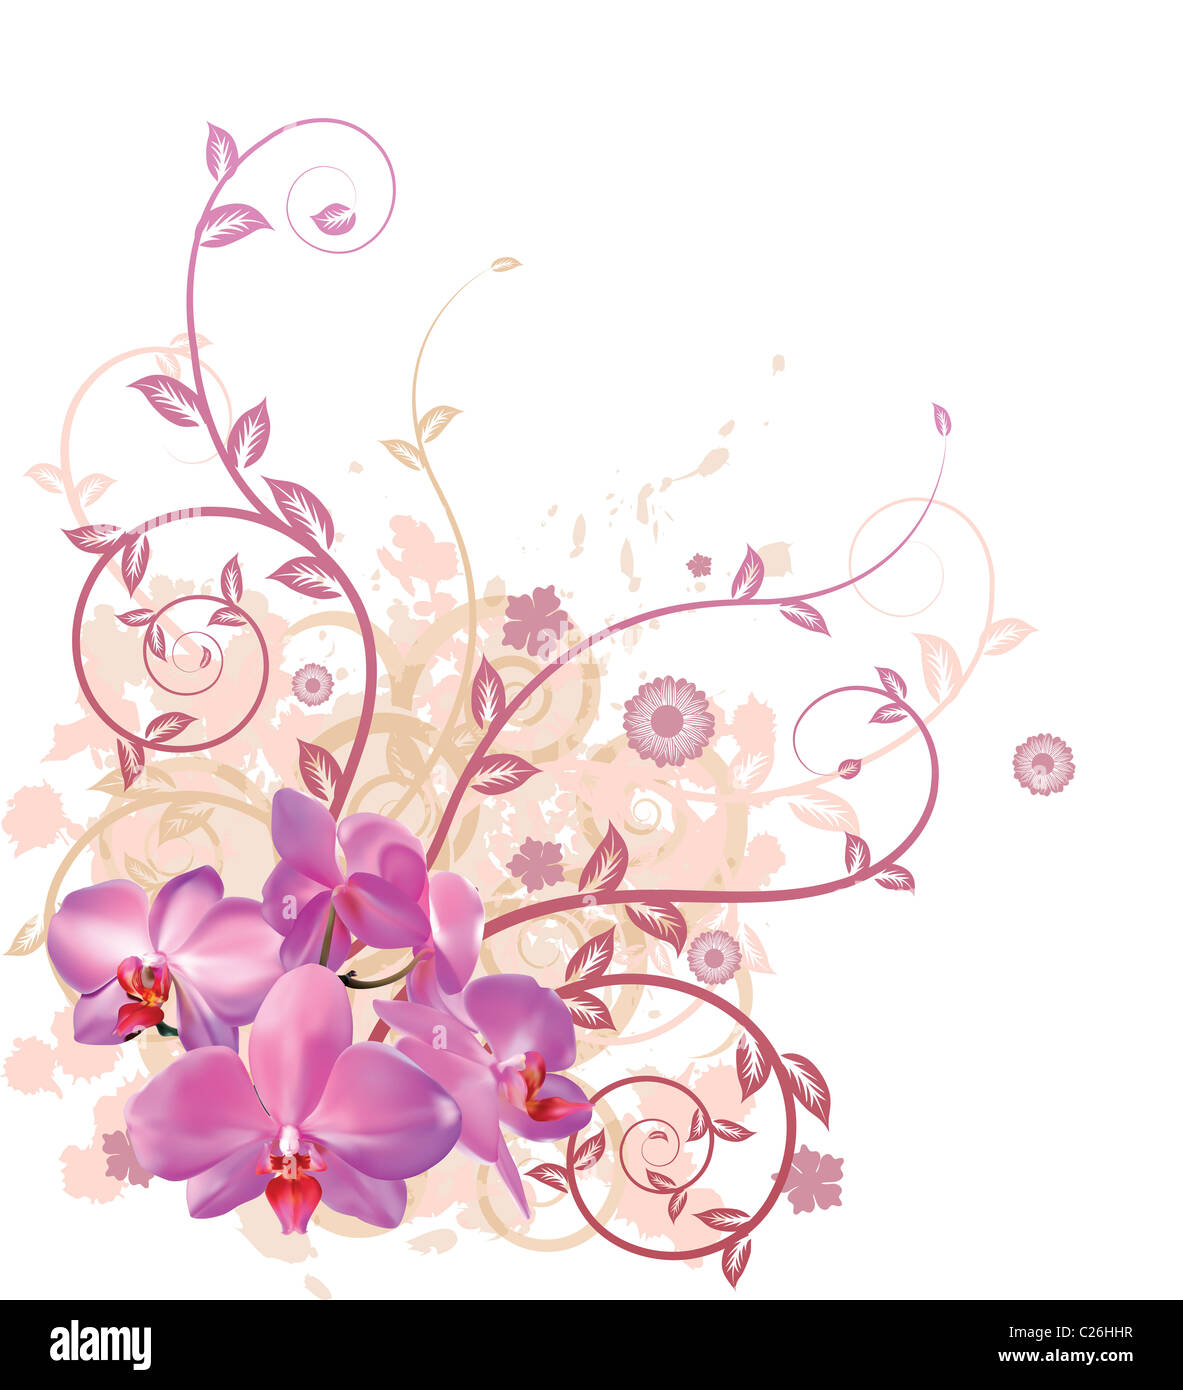 A very stylish vector floral background illustration with pink orchid flowers. Stock Photo